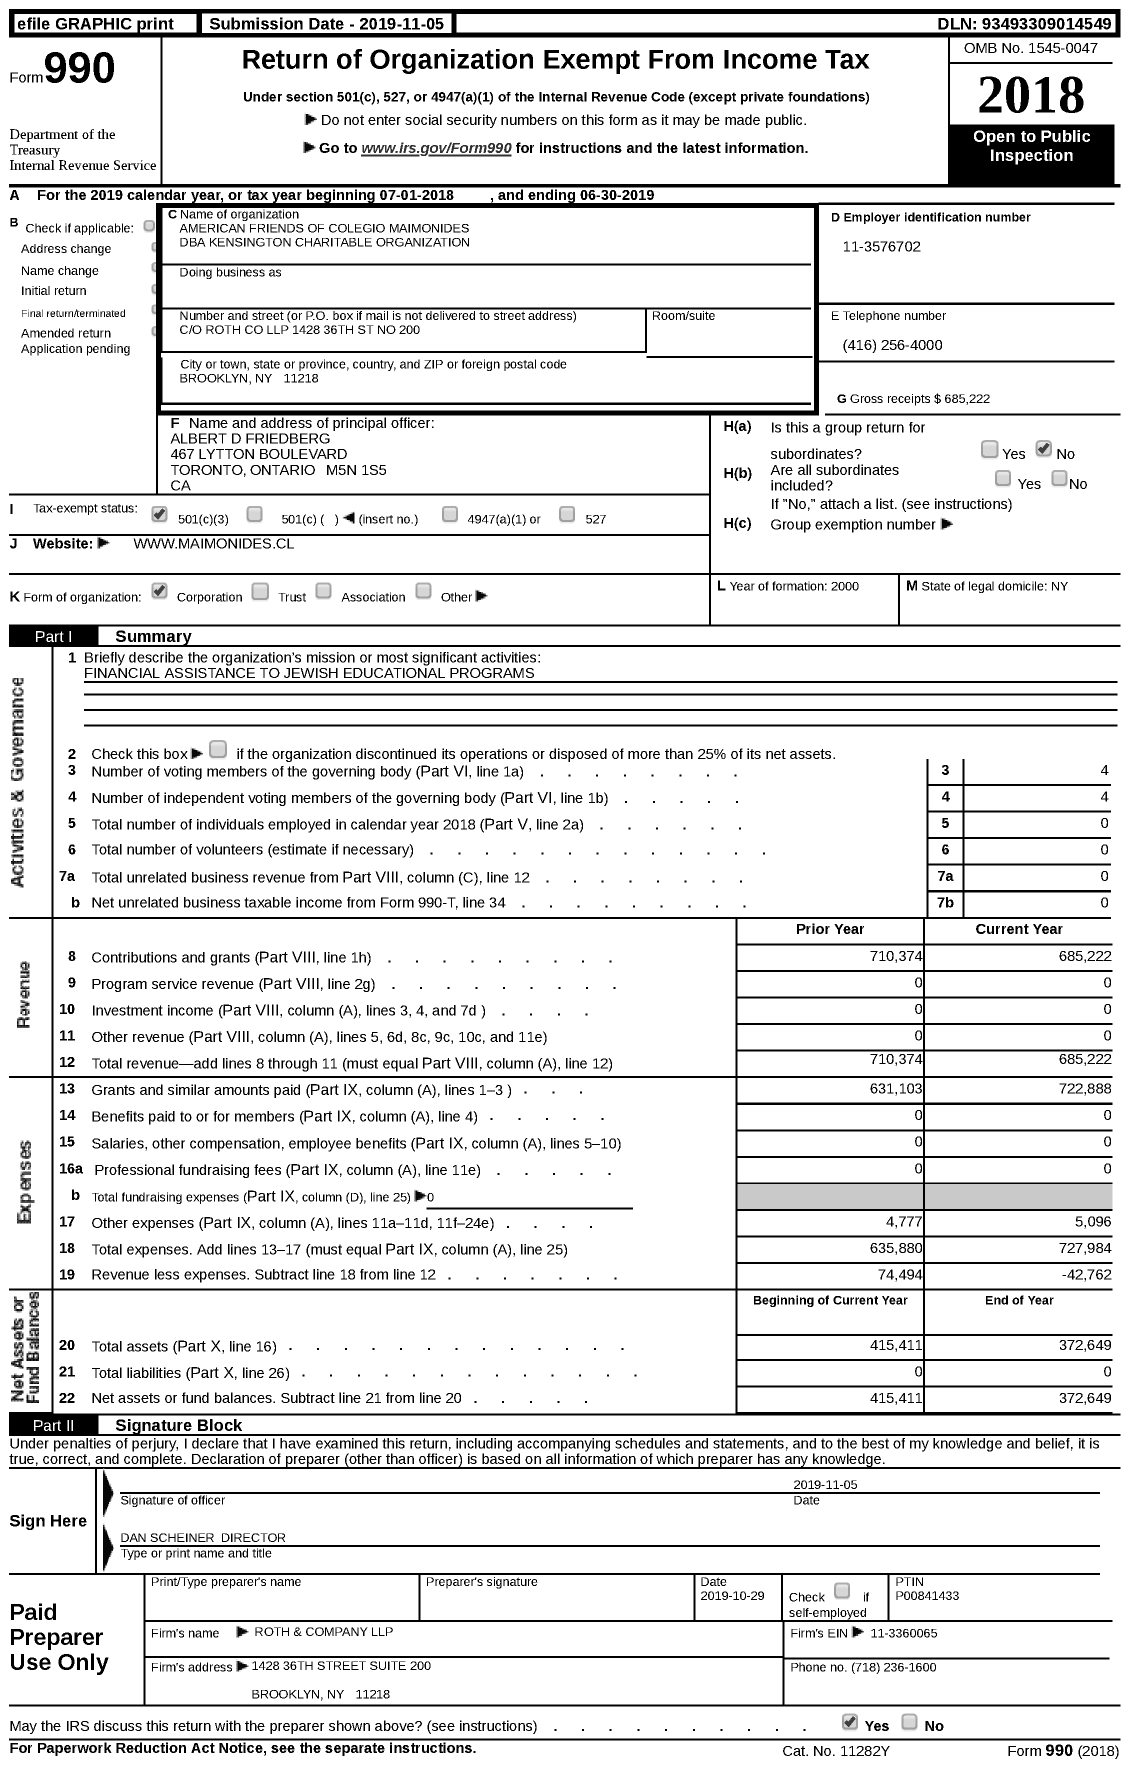 Image of first page of 2018 Form 990 for Kensington Charitable Organization